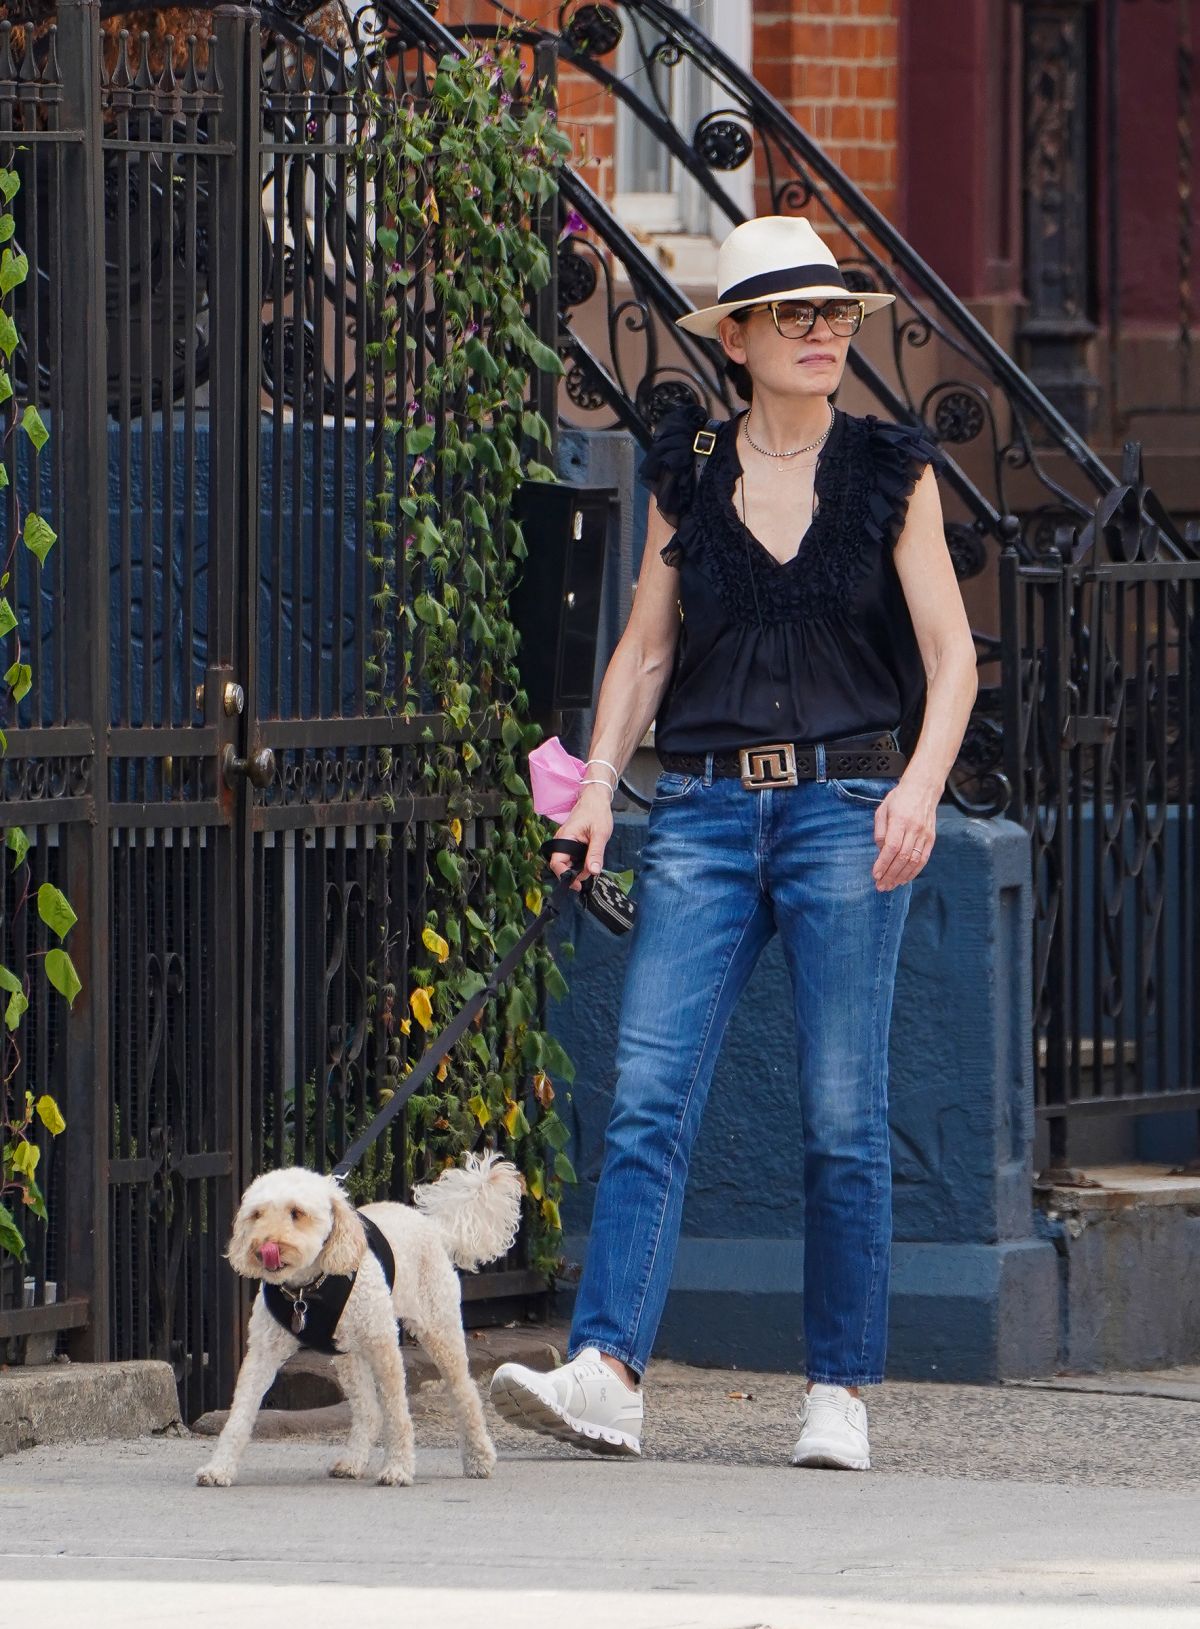 JULIANNA MARGUILES Out with Her Dog in New York 08/31/2022.